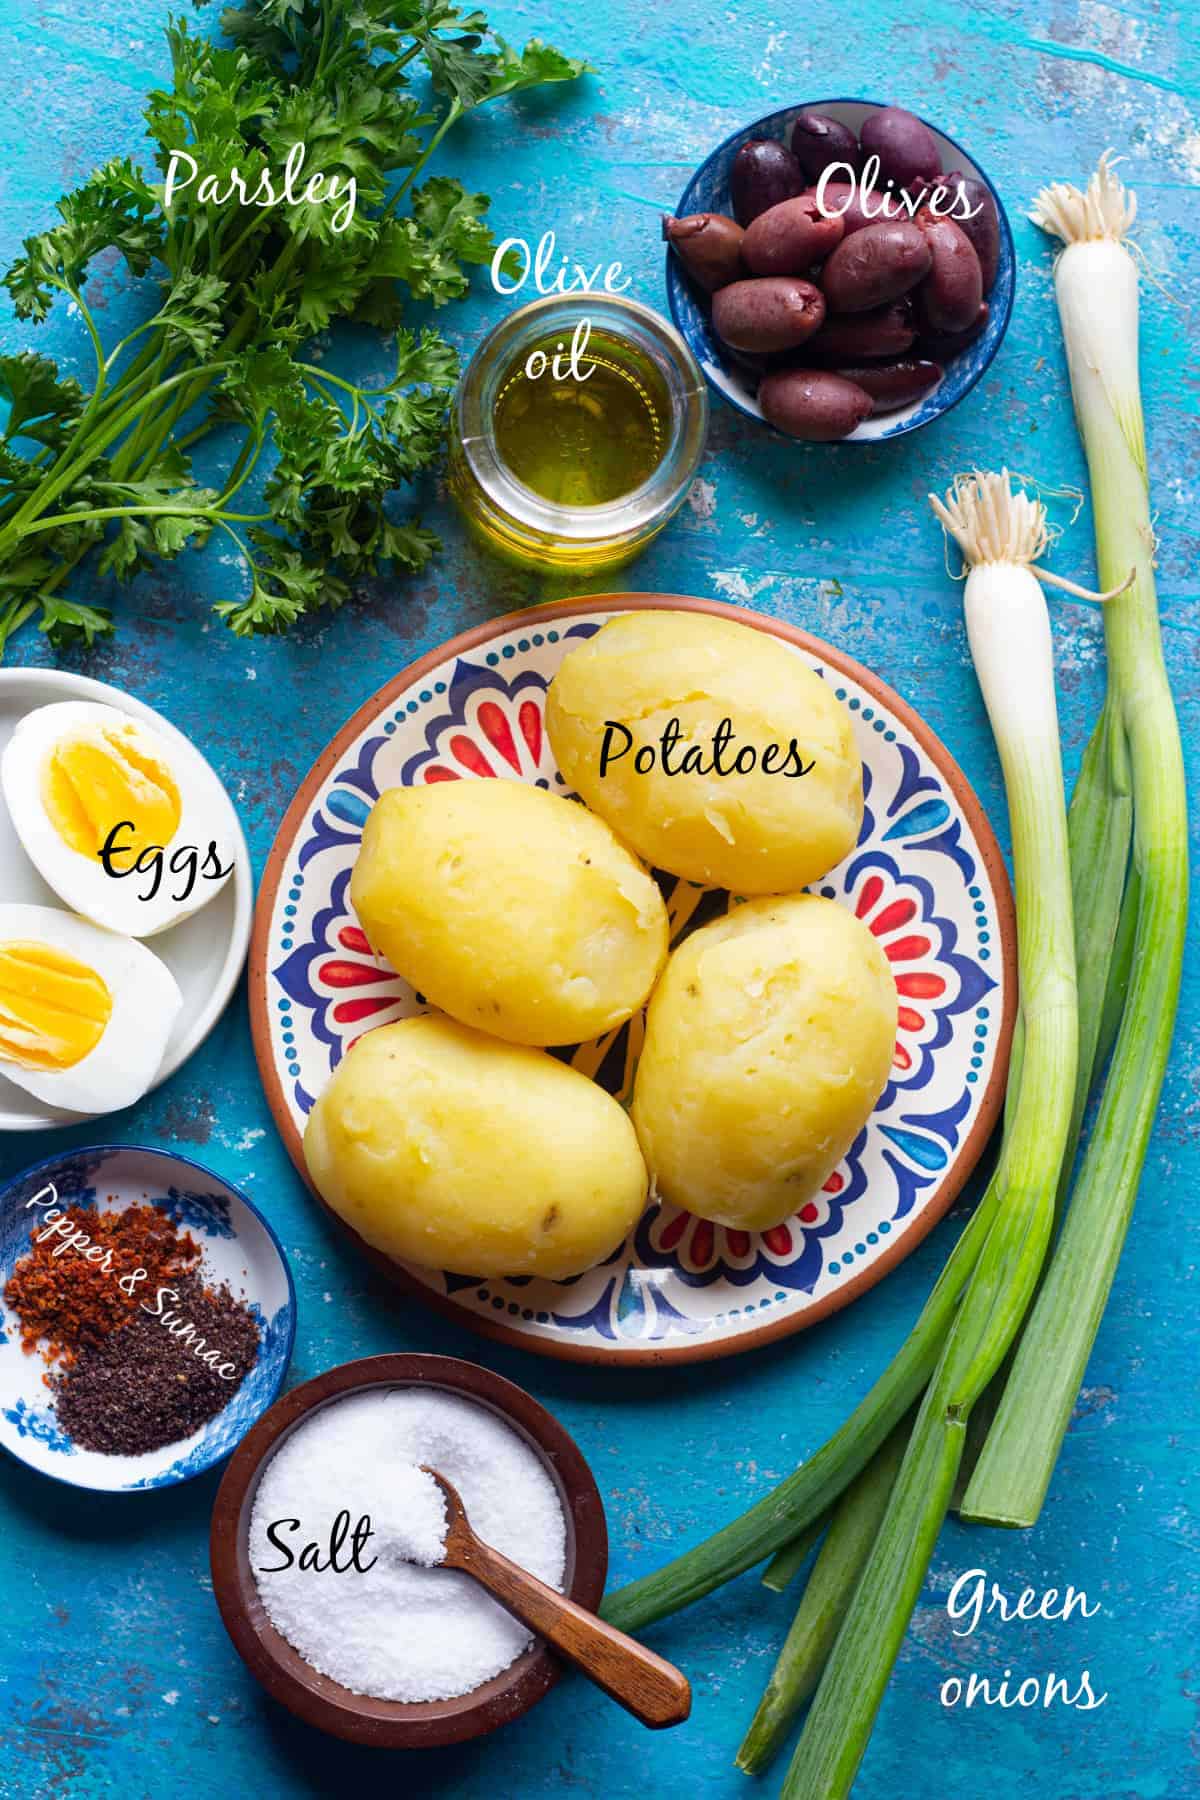 ingredients to make turkish potato salad are boiled potatoes, green onions, parsley, olives, eggs, olive oil and spices